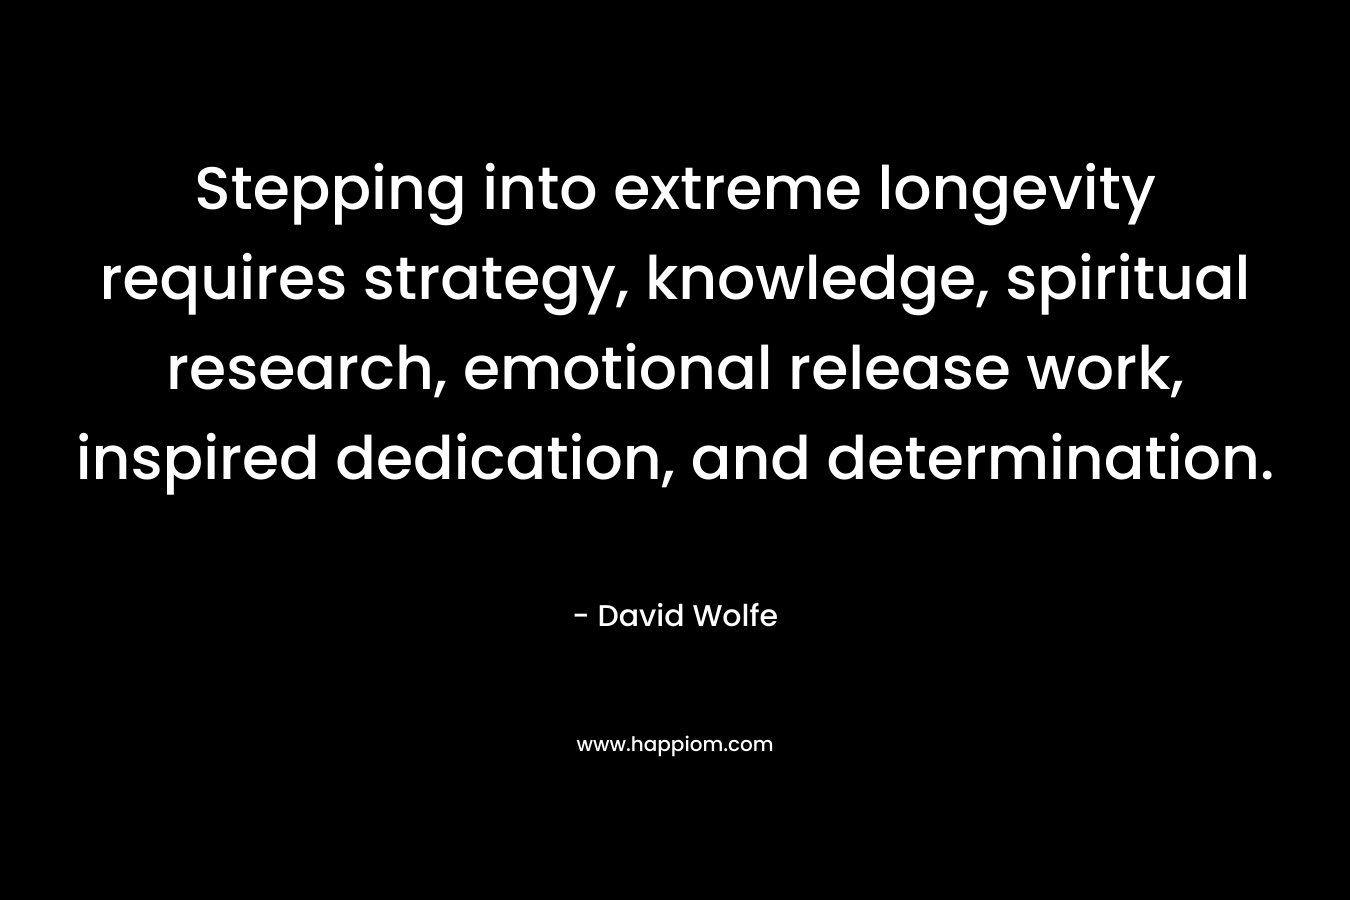 Stepping into extreme longevity requires strategy, knowledge, spiritual research, emotional release work, inspired dedication, and determination. – David Wolfe